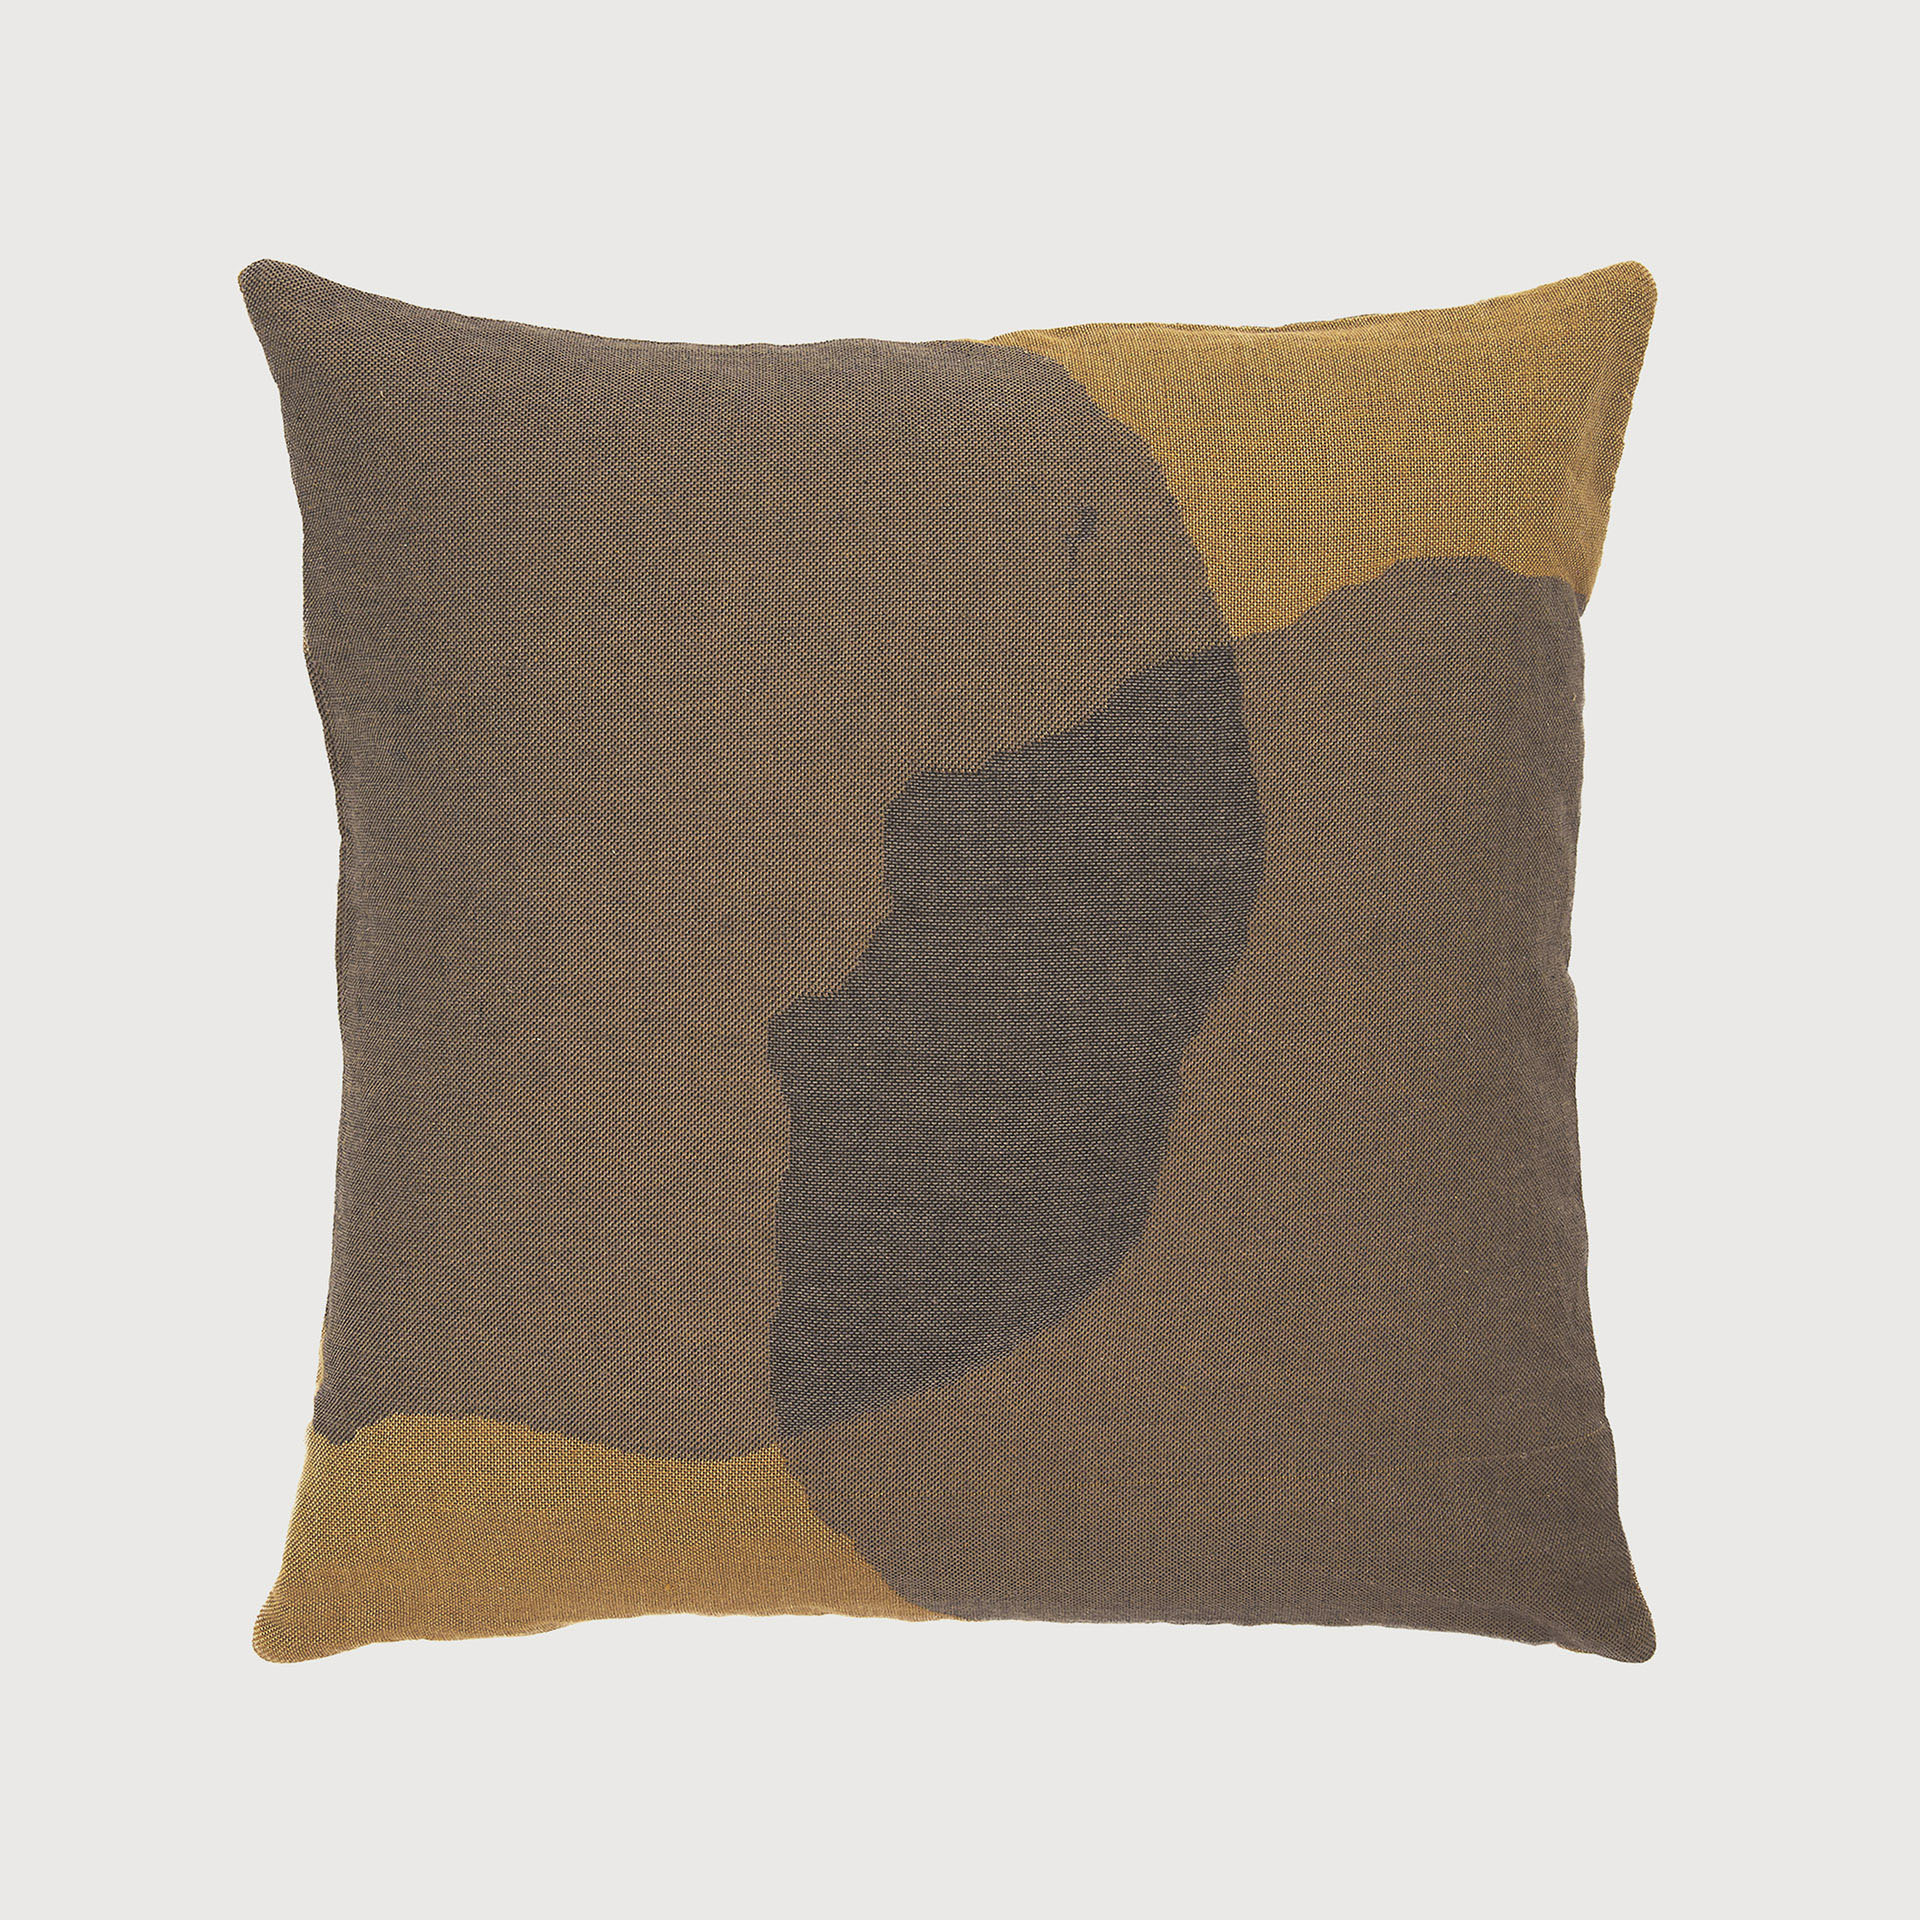 [21027*] Overlapping Dots cushion